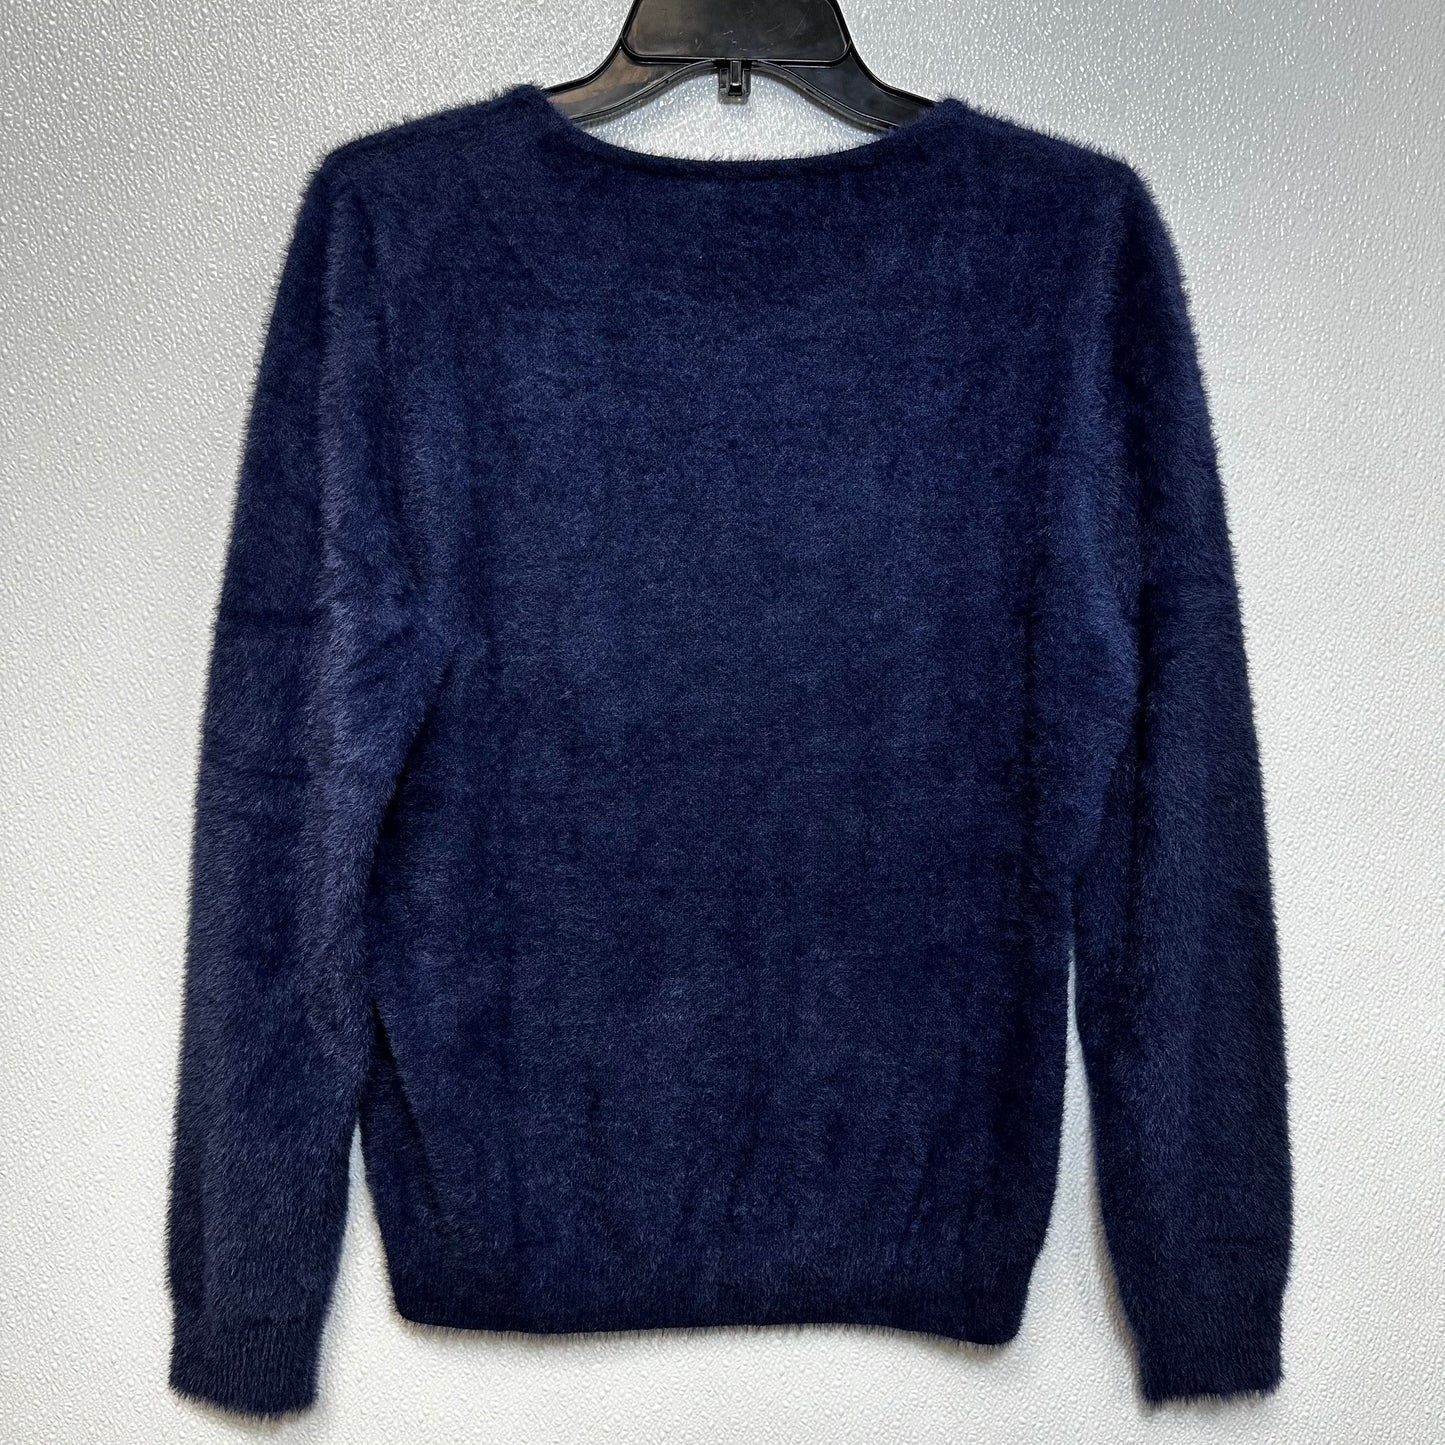 Navy Sweater Clothes Mentor, Size L